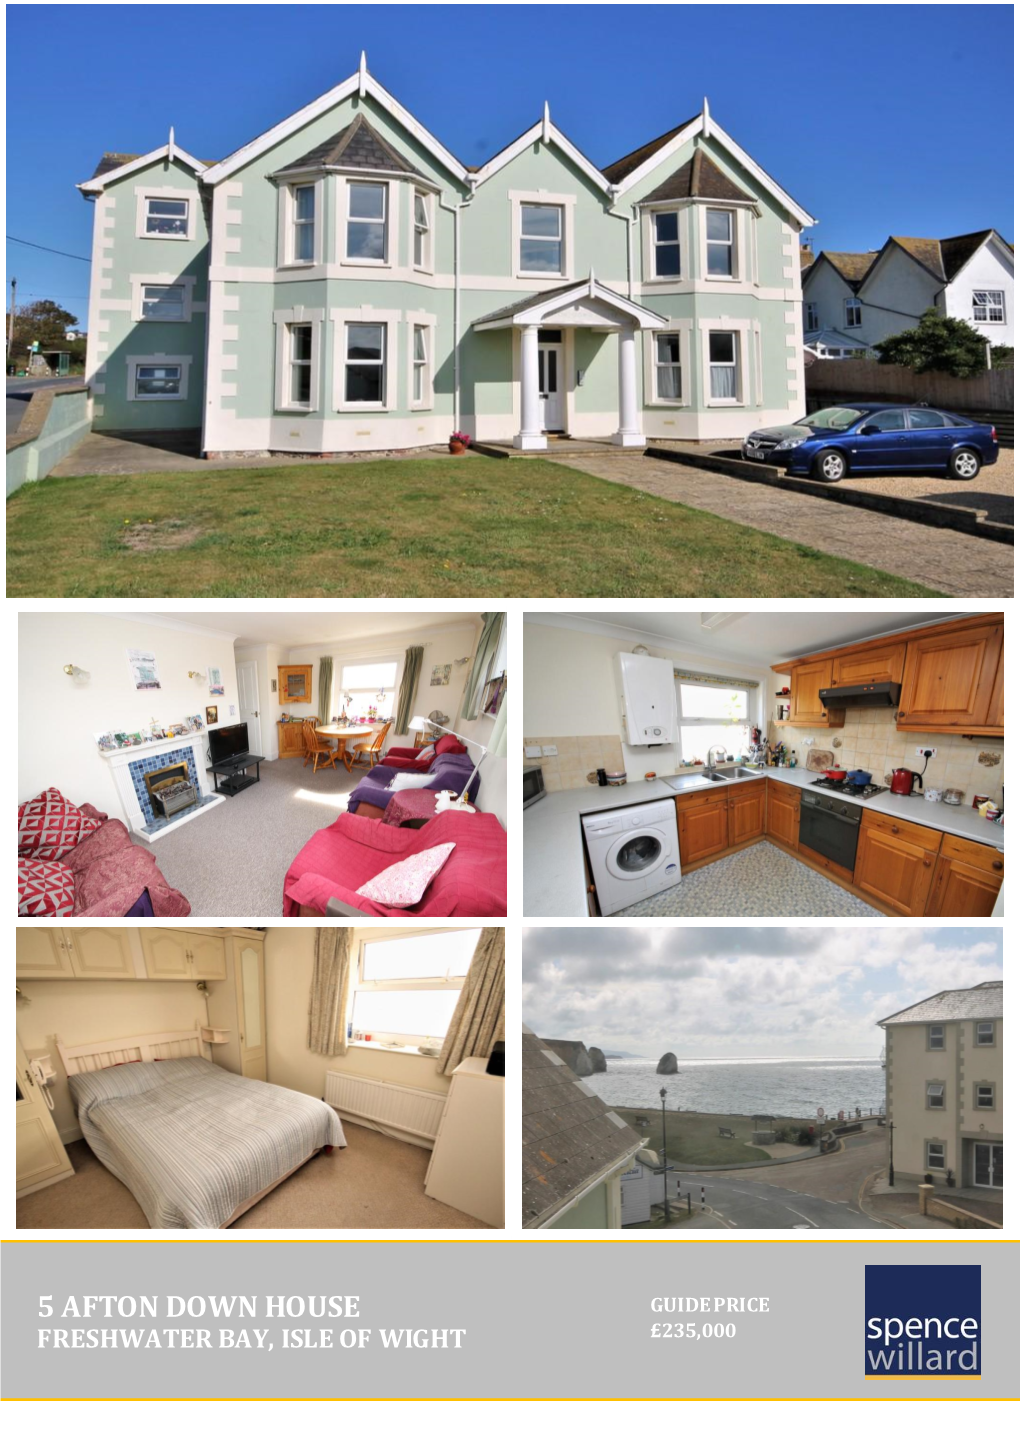 5 Afton Down House Guide Price Freshwater Bay, Isle of Wight £235,000